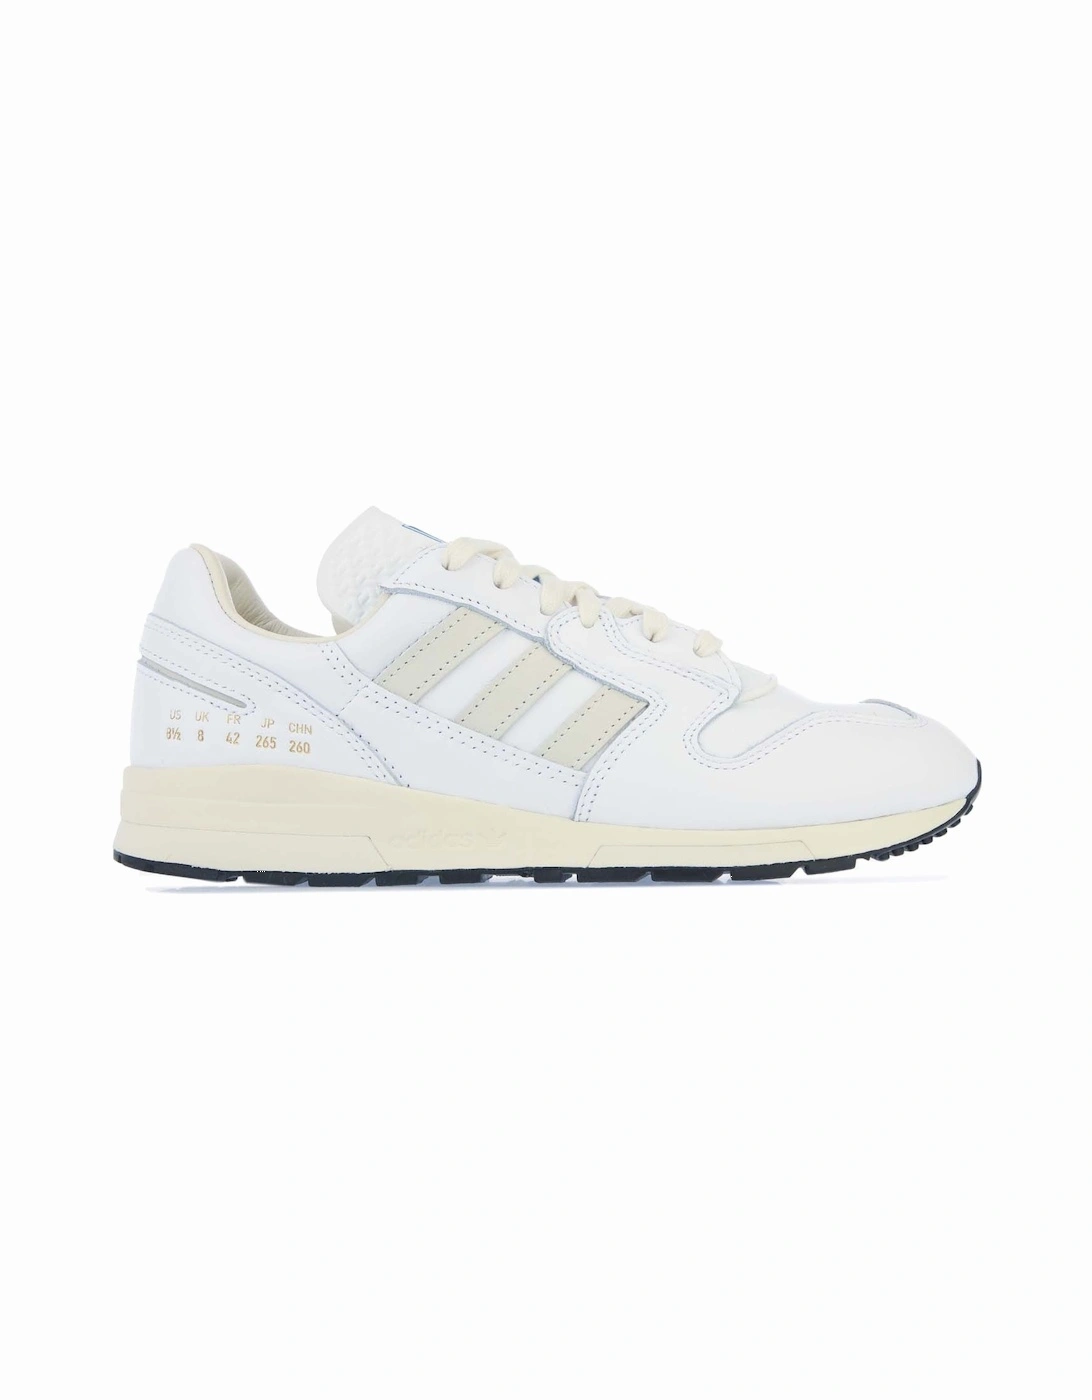 Men's Mens ZX 420 Trainers - White